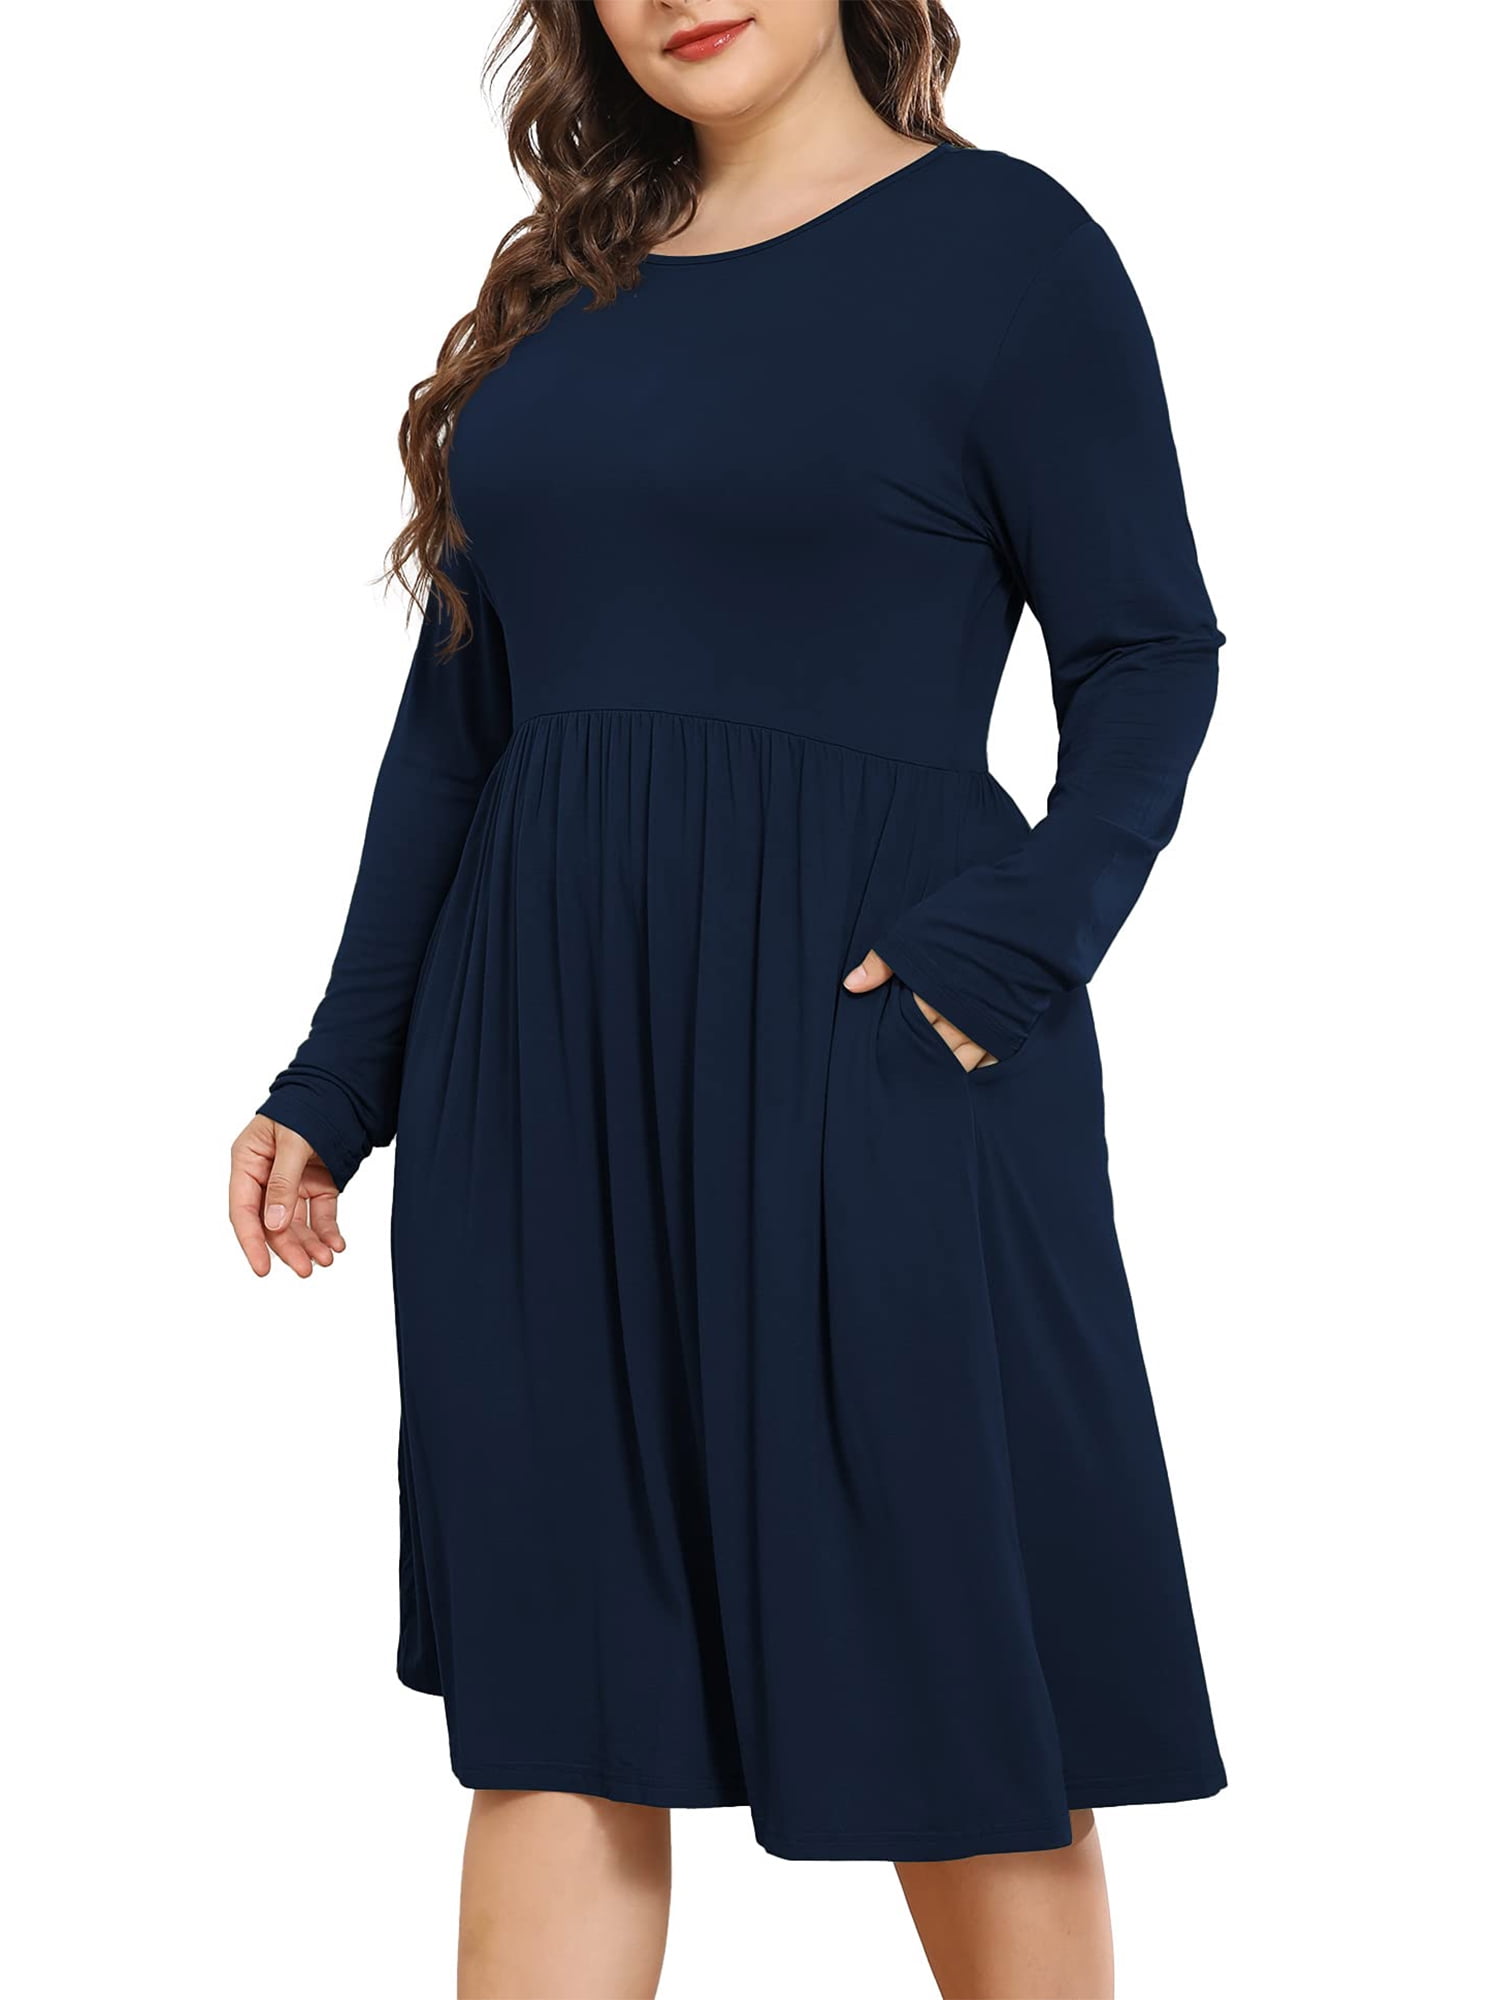 POSESHE Women's Plus Size Winter Casual Dress, Long Sleeves, Loose ...